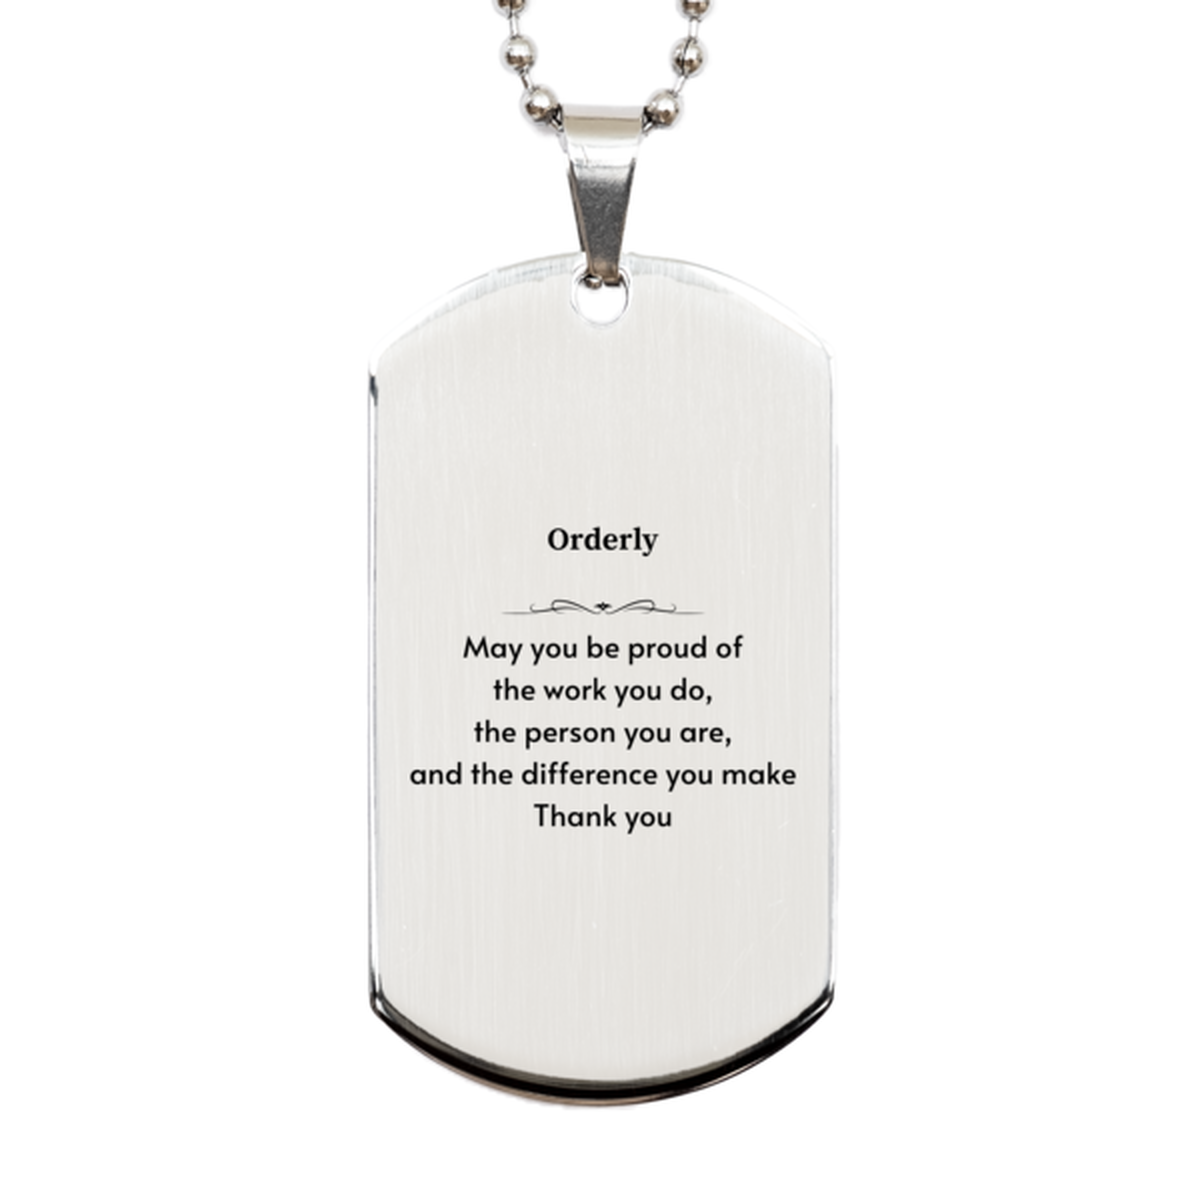 Heartwarming Silver Dog Tag Retirement Coworkers Gifts for Orderly, Orderly May You be proud of the work you do, the person you are Gifts for Boss Men Women Friends